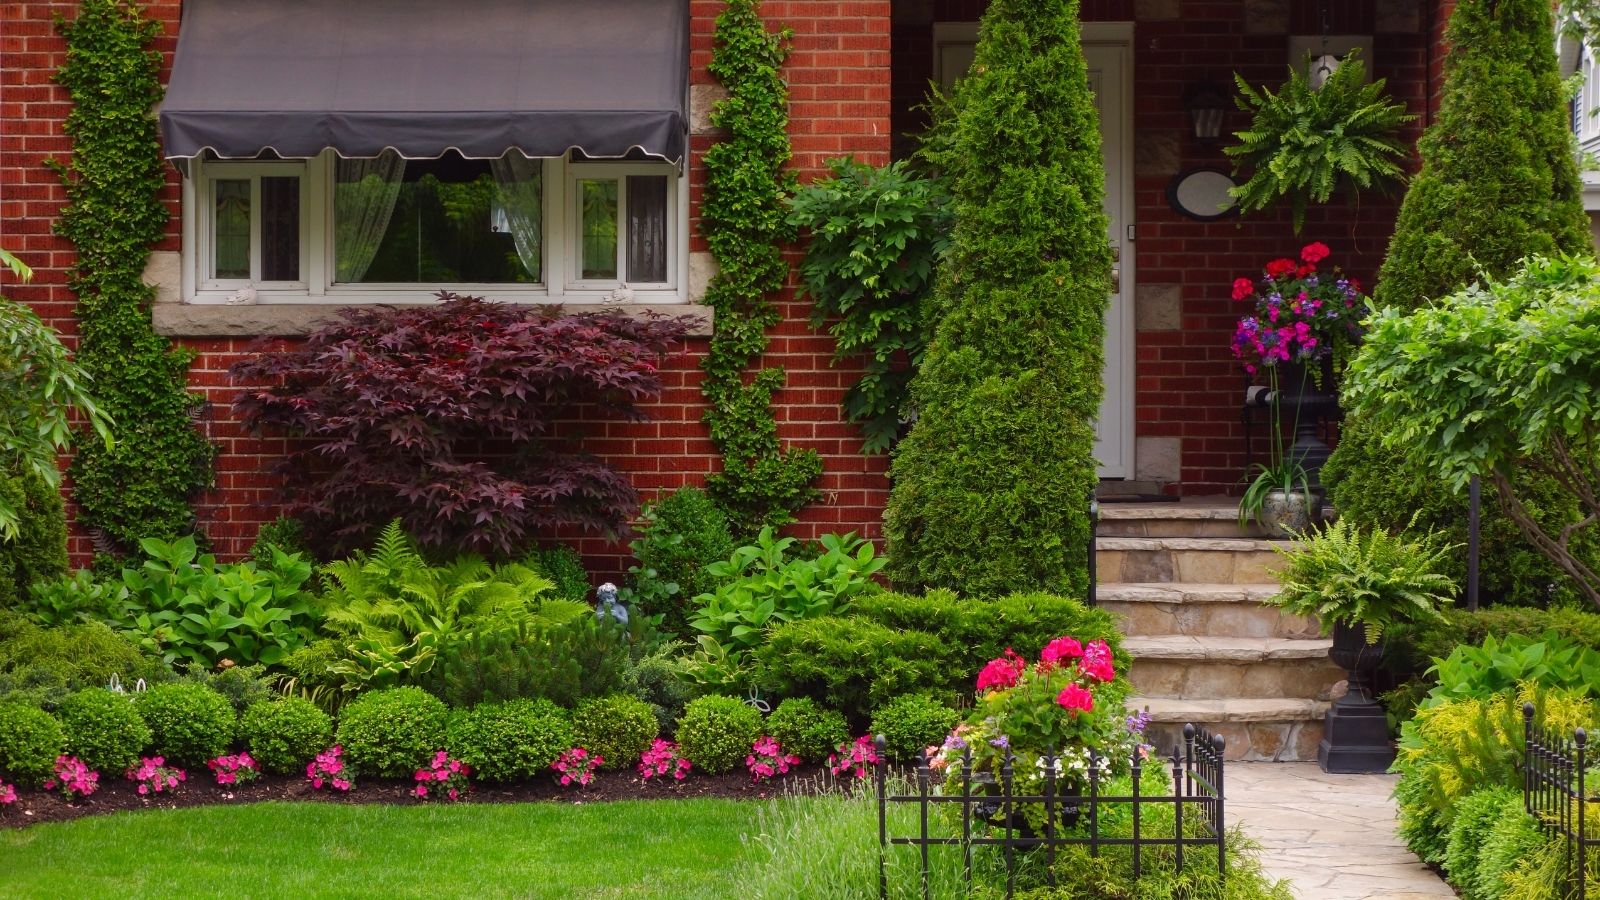 The Importance of Landscaping: Curb Appeal and Home Value
